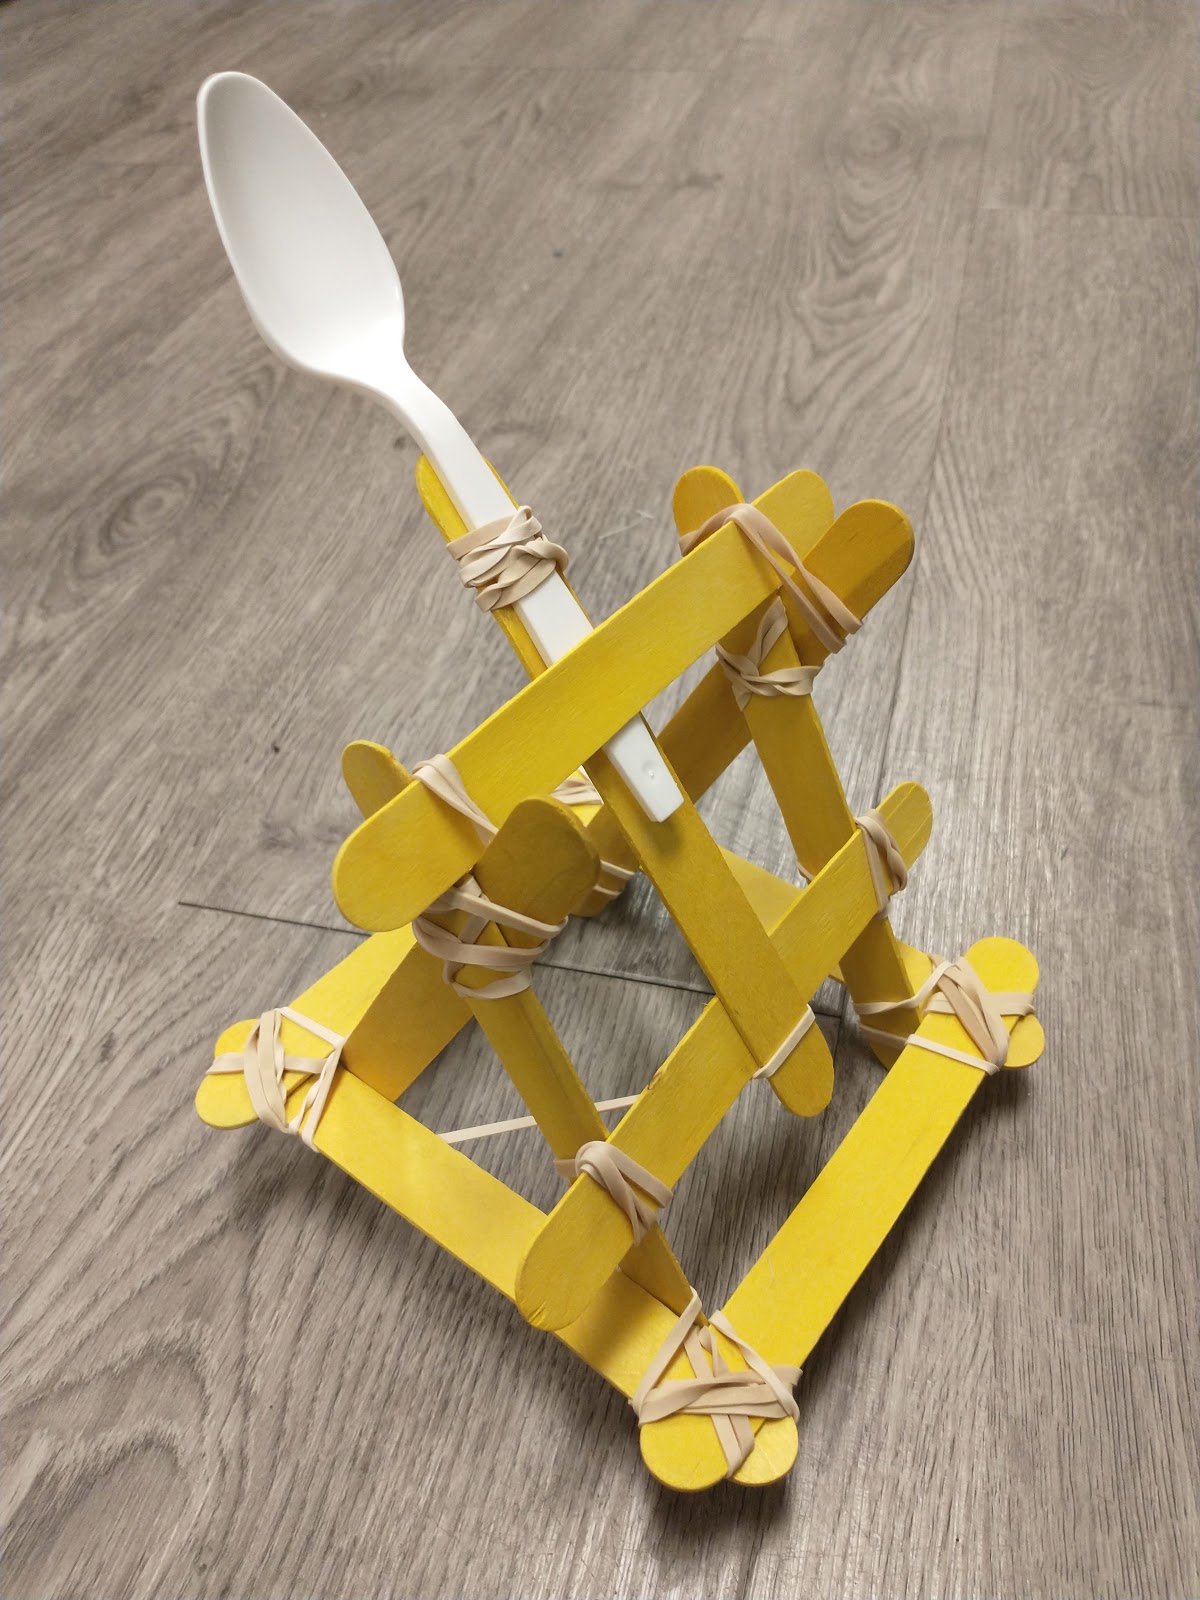 diy catapult out of popsicle sticks